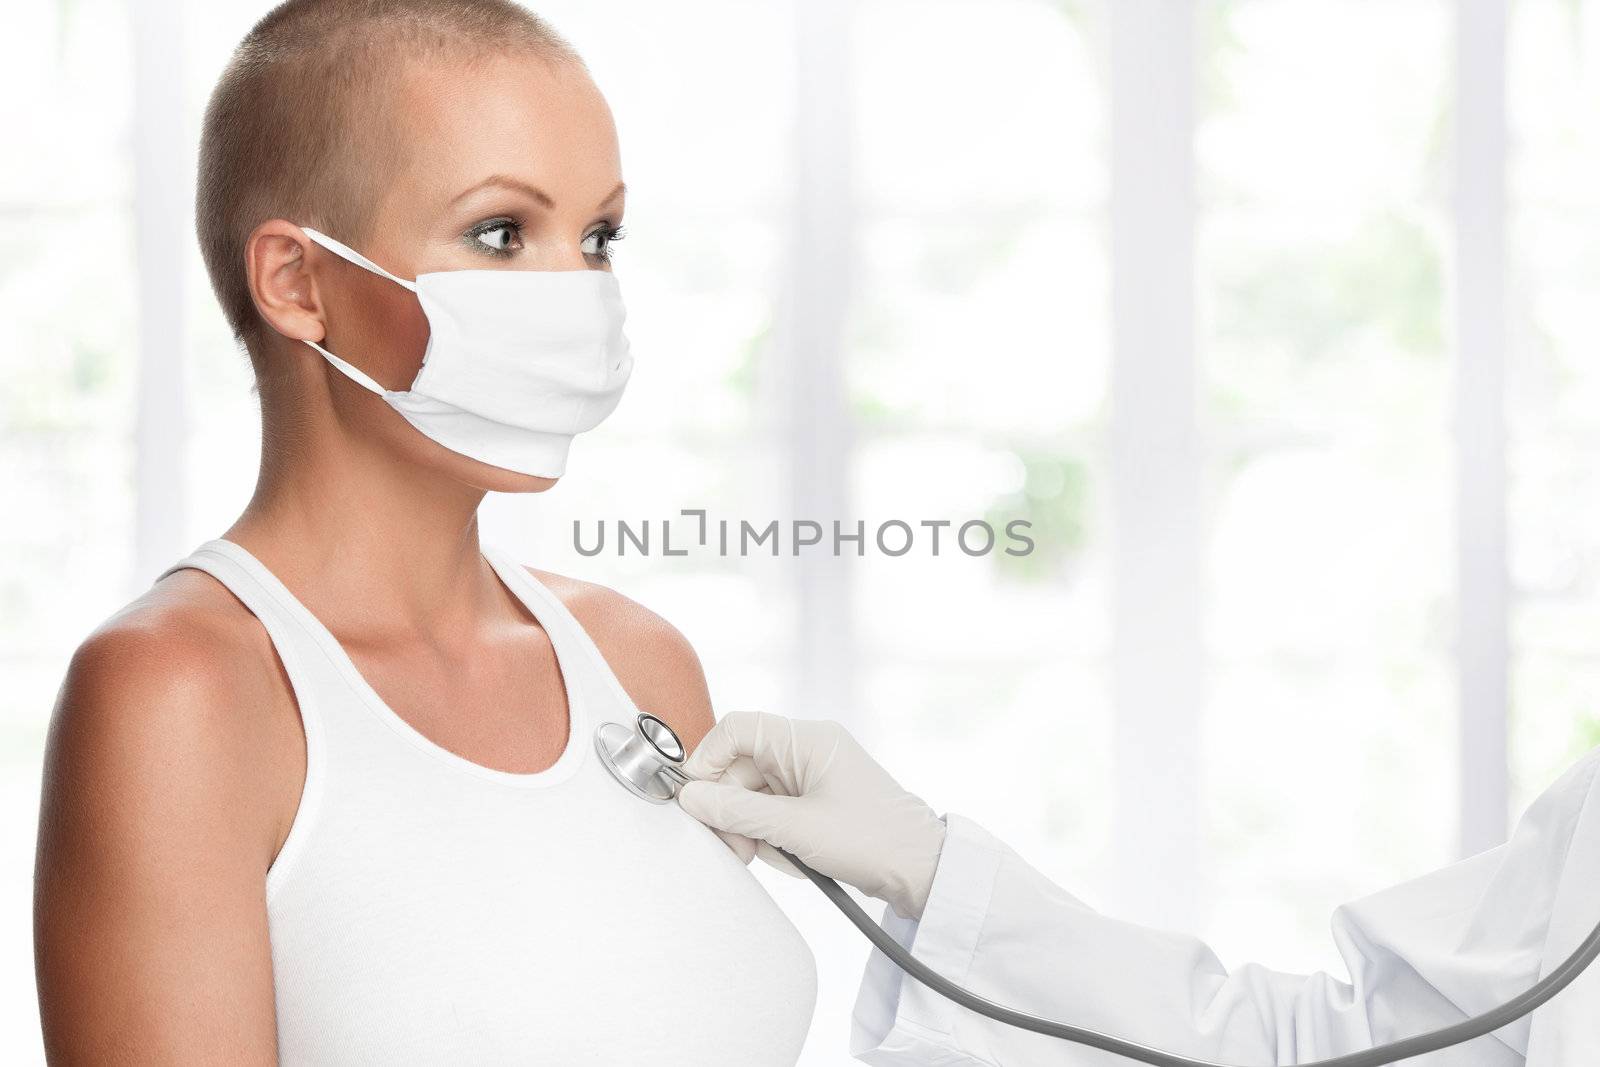 Portrait of young nice woman on medical examination by ersler